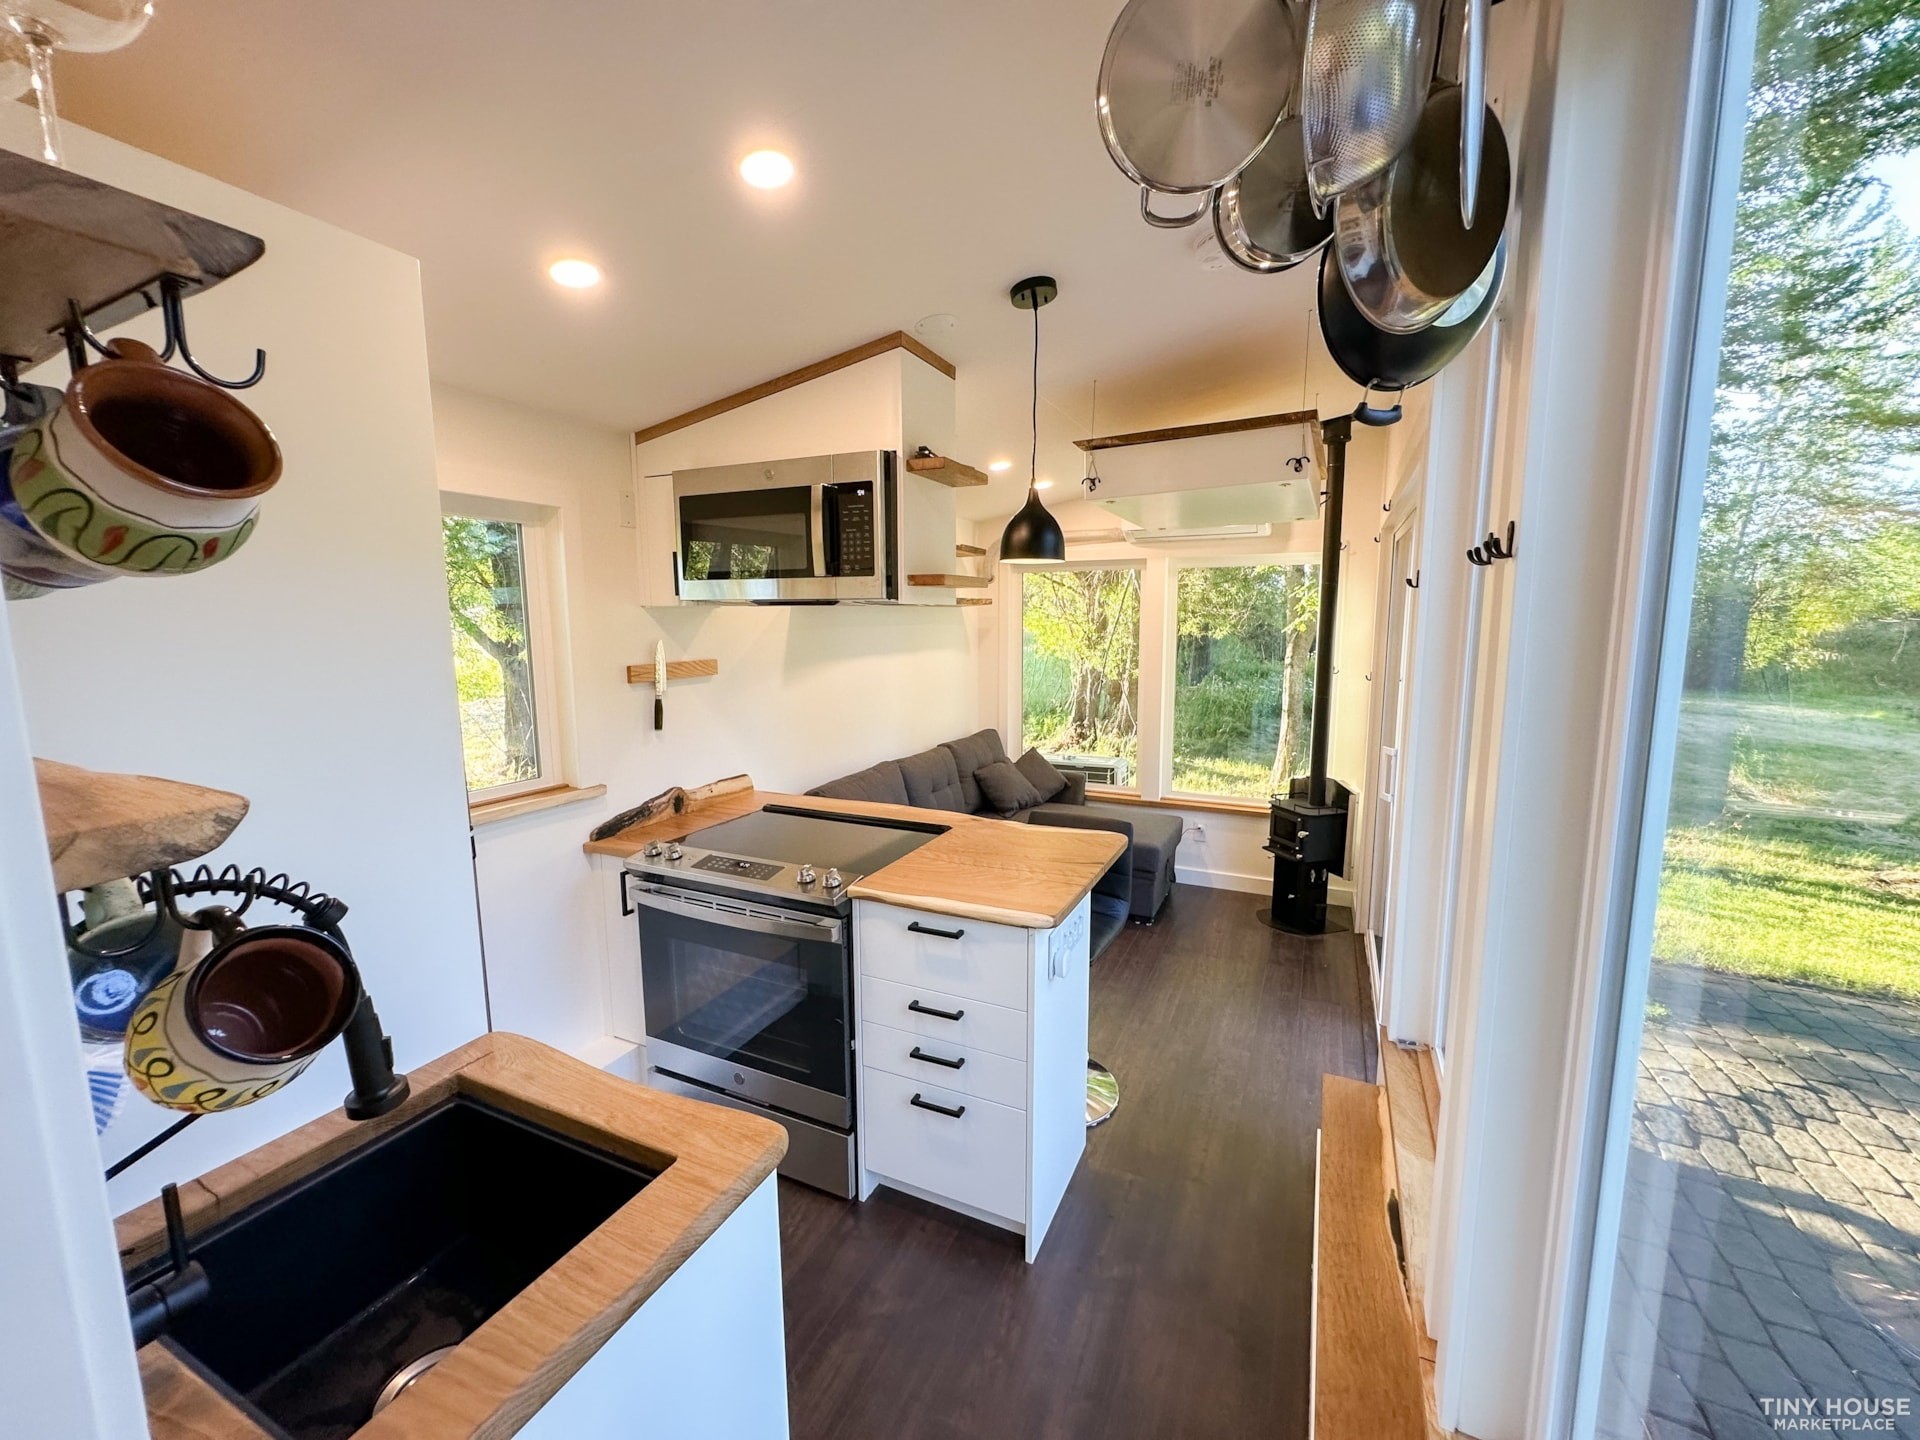 https://s1.cdn.autoevolution.com/images/news/gallery/fabulous-tiny-home-in-oregon-reveals-game-changing-design-hacks_1.jpg